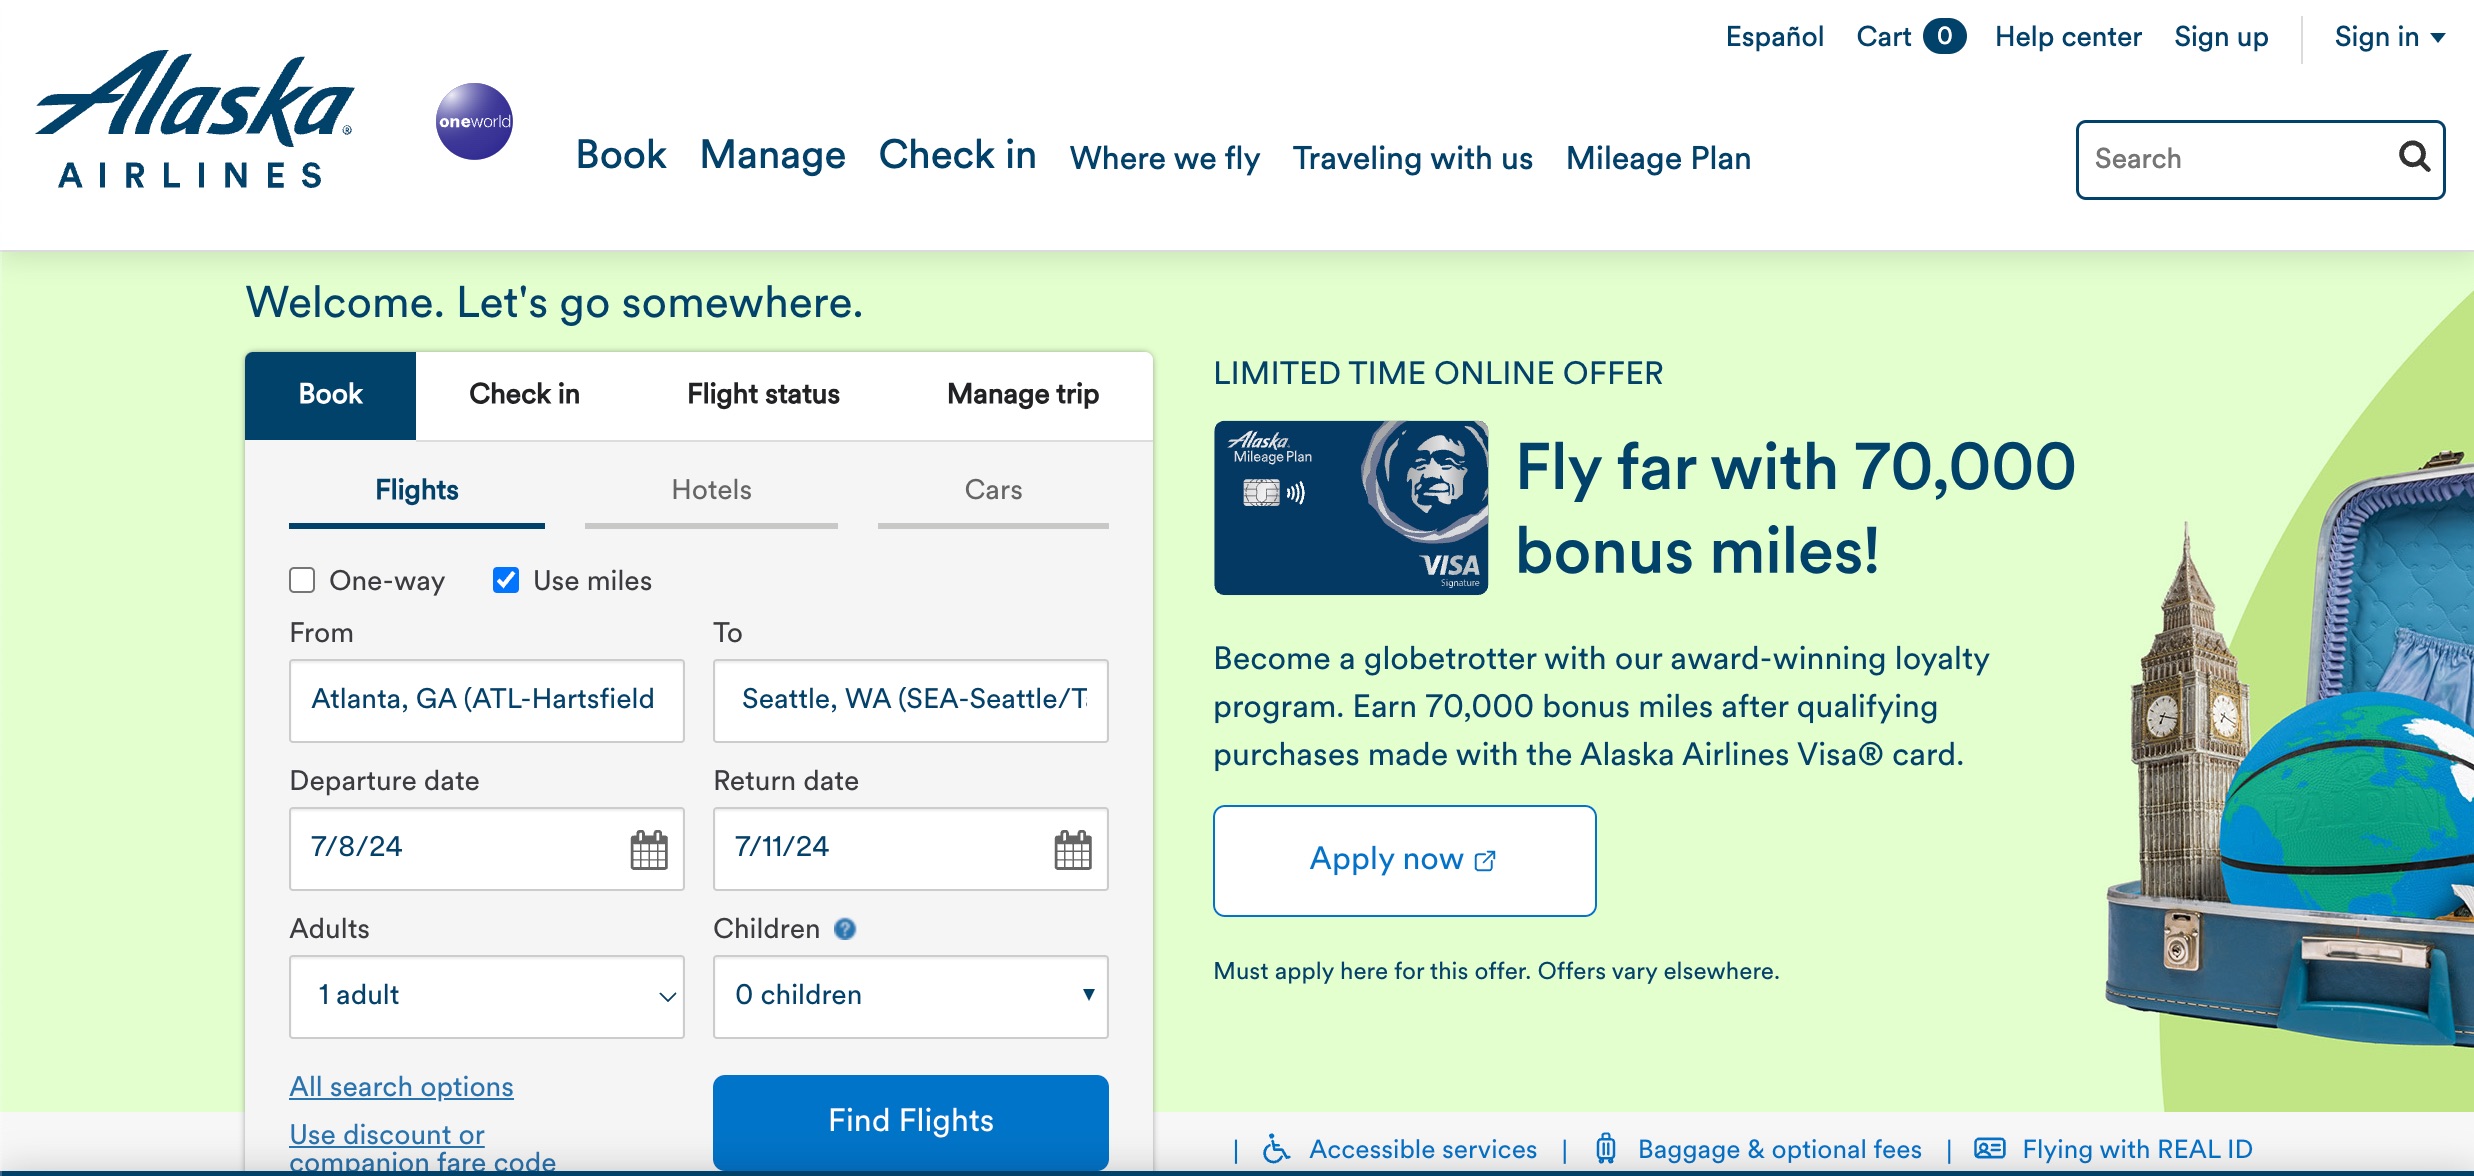 Alaska_Airlines_-_Flight_Deals_and_Cheap_Airline_Tickets_-_Book_Today.jpg